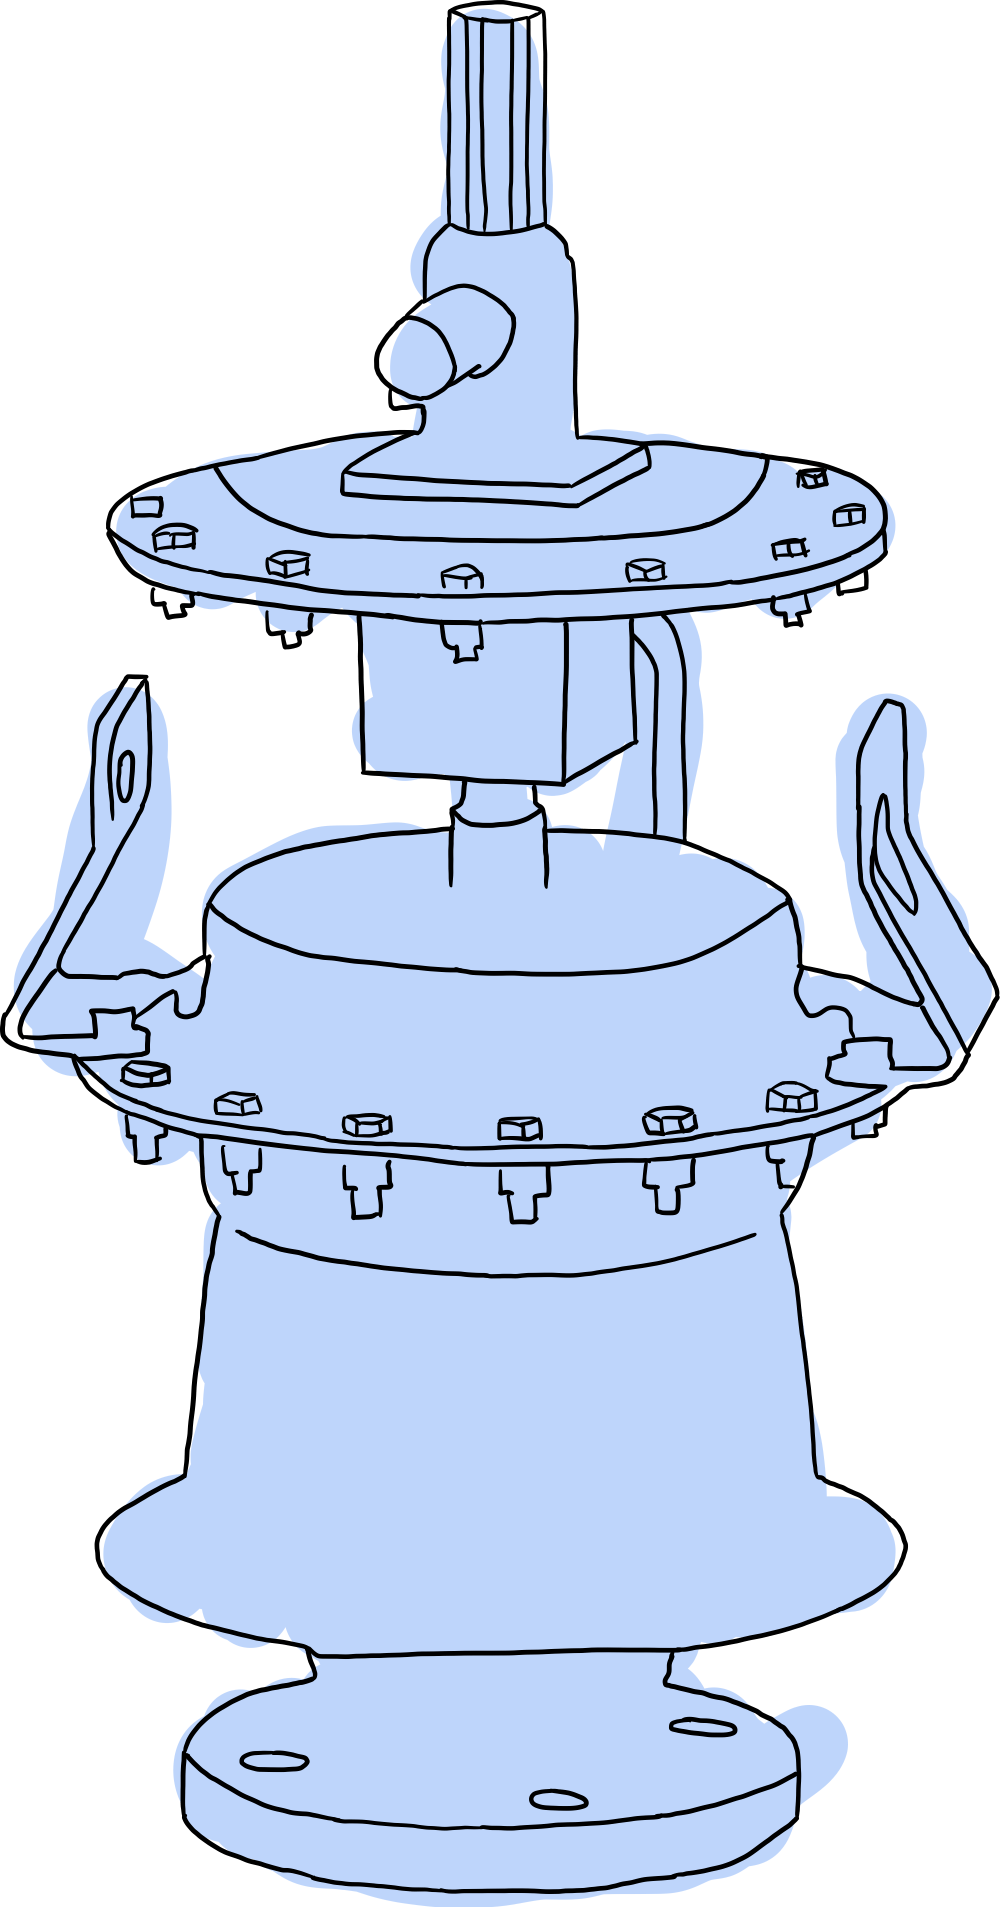 Pilot Operated Relief Valves